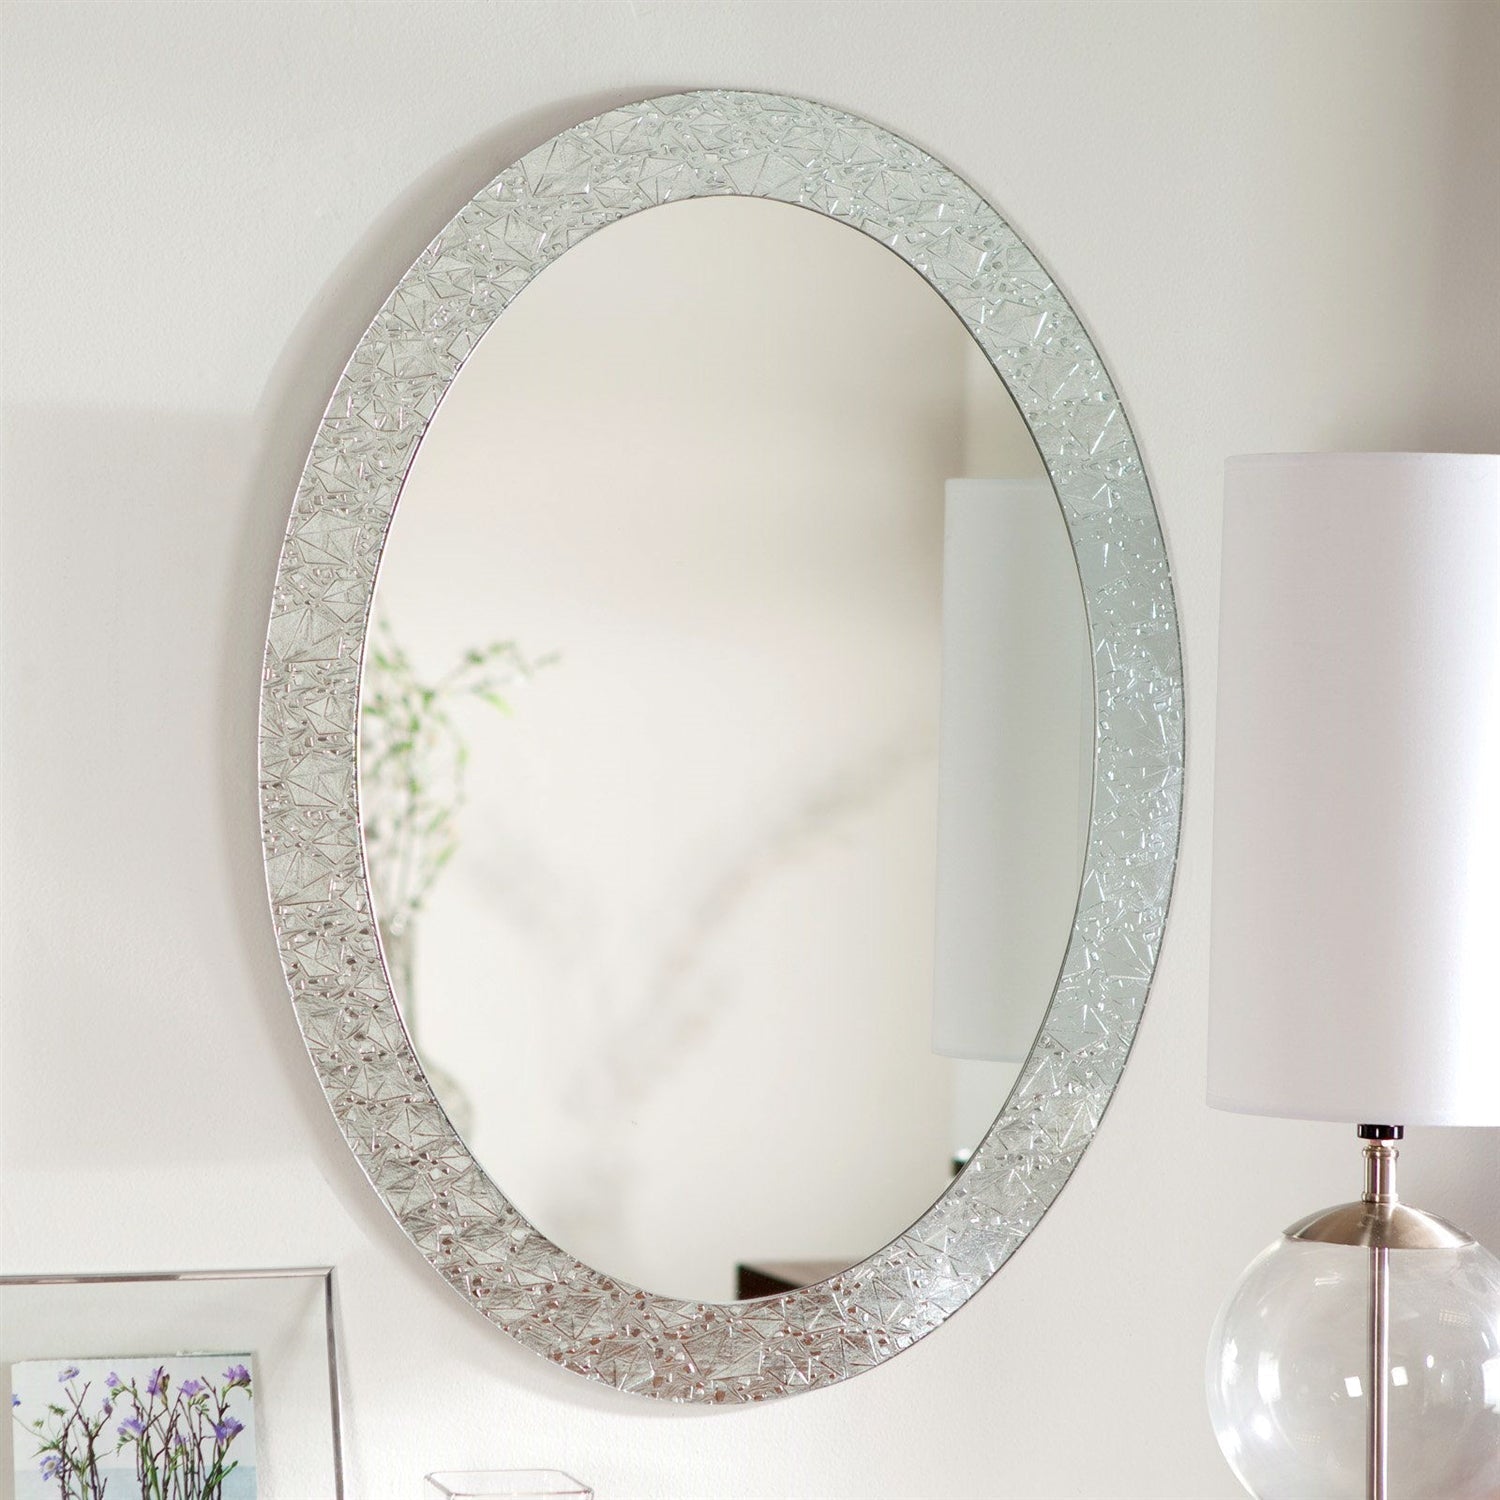 Accents > Mirrors - Oval Frame-less Bathroom Vanity Wall Mirror With Elegant Crystal Look Border